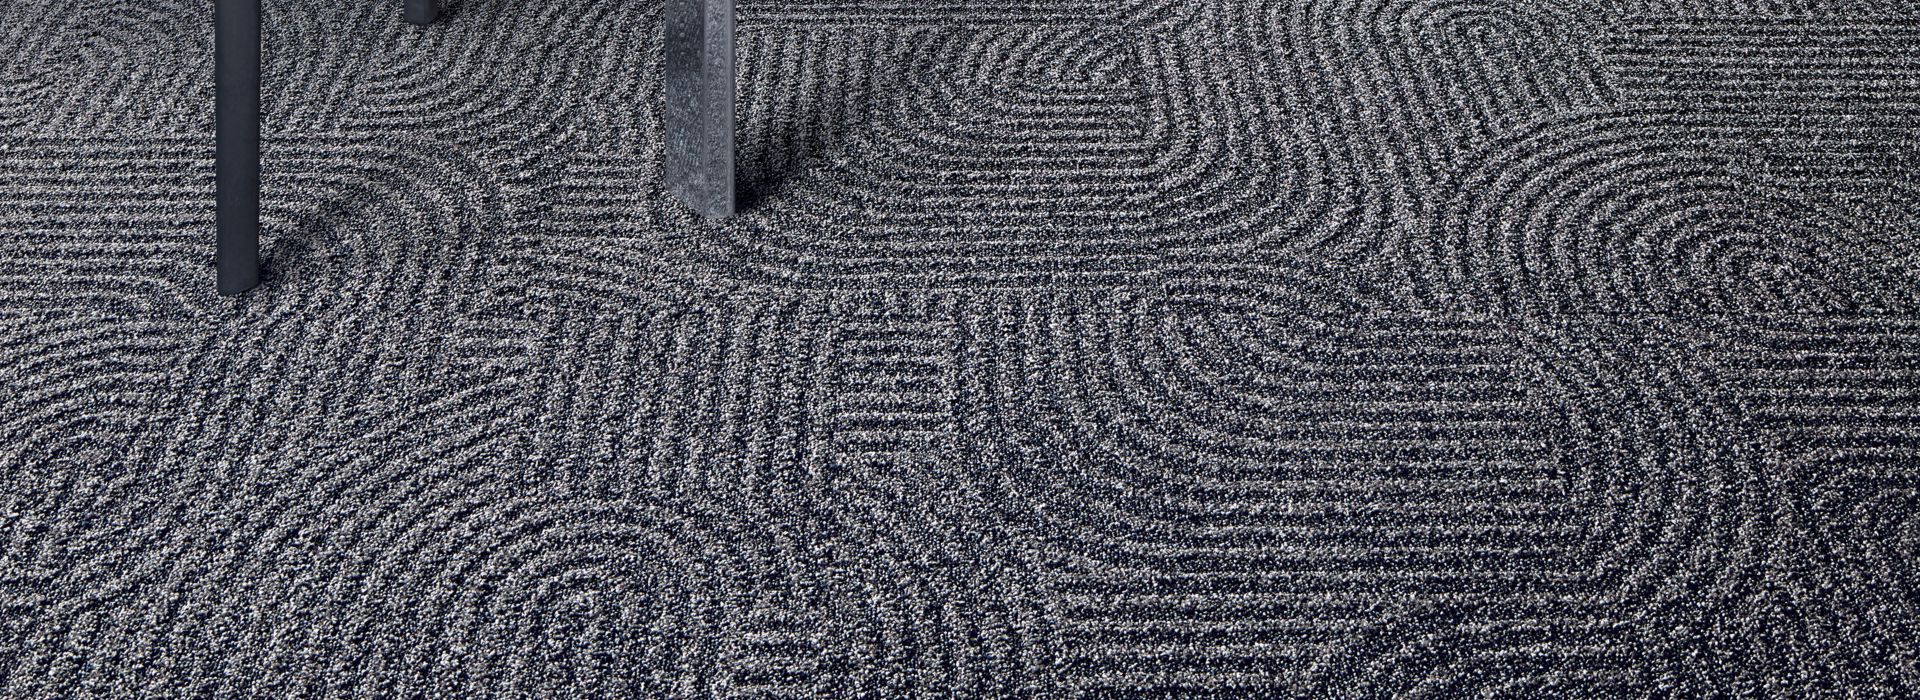 Interface Step this Way carpet tile in office common area with tree Bildnummer 1